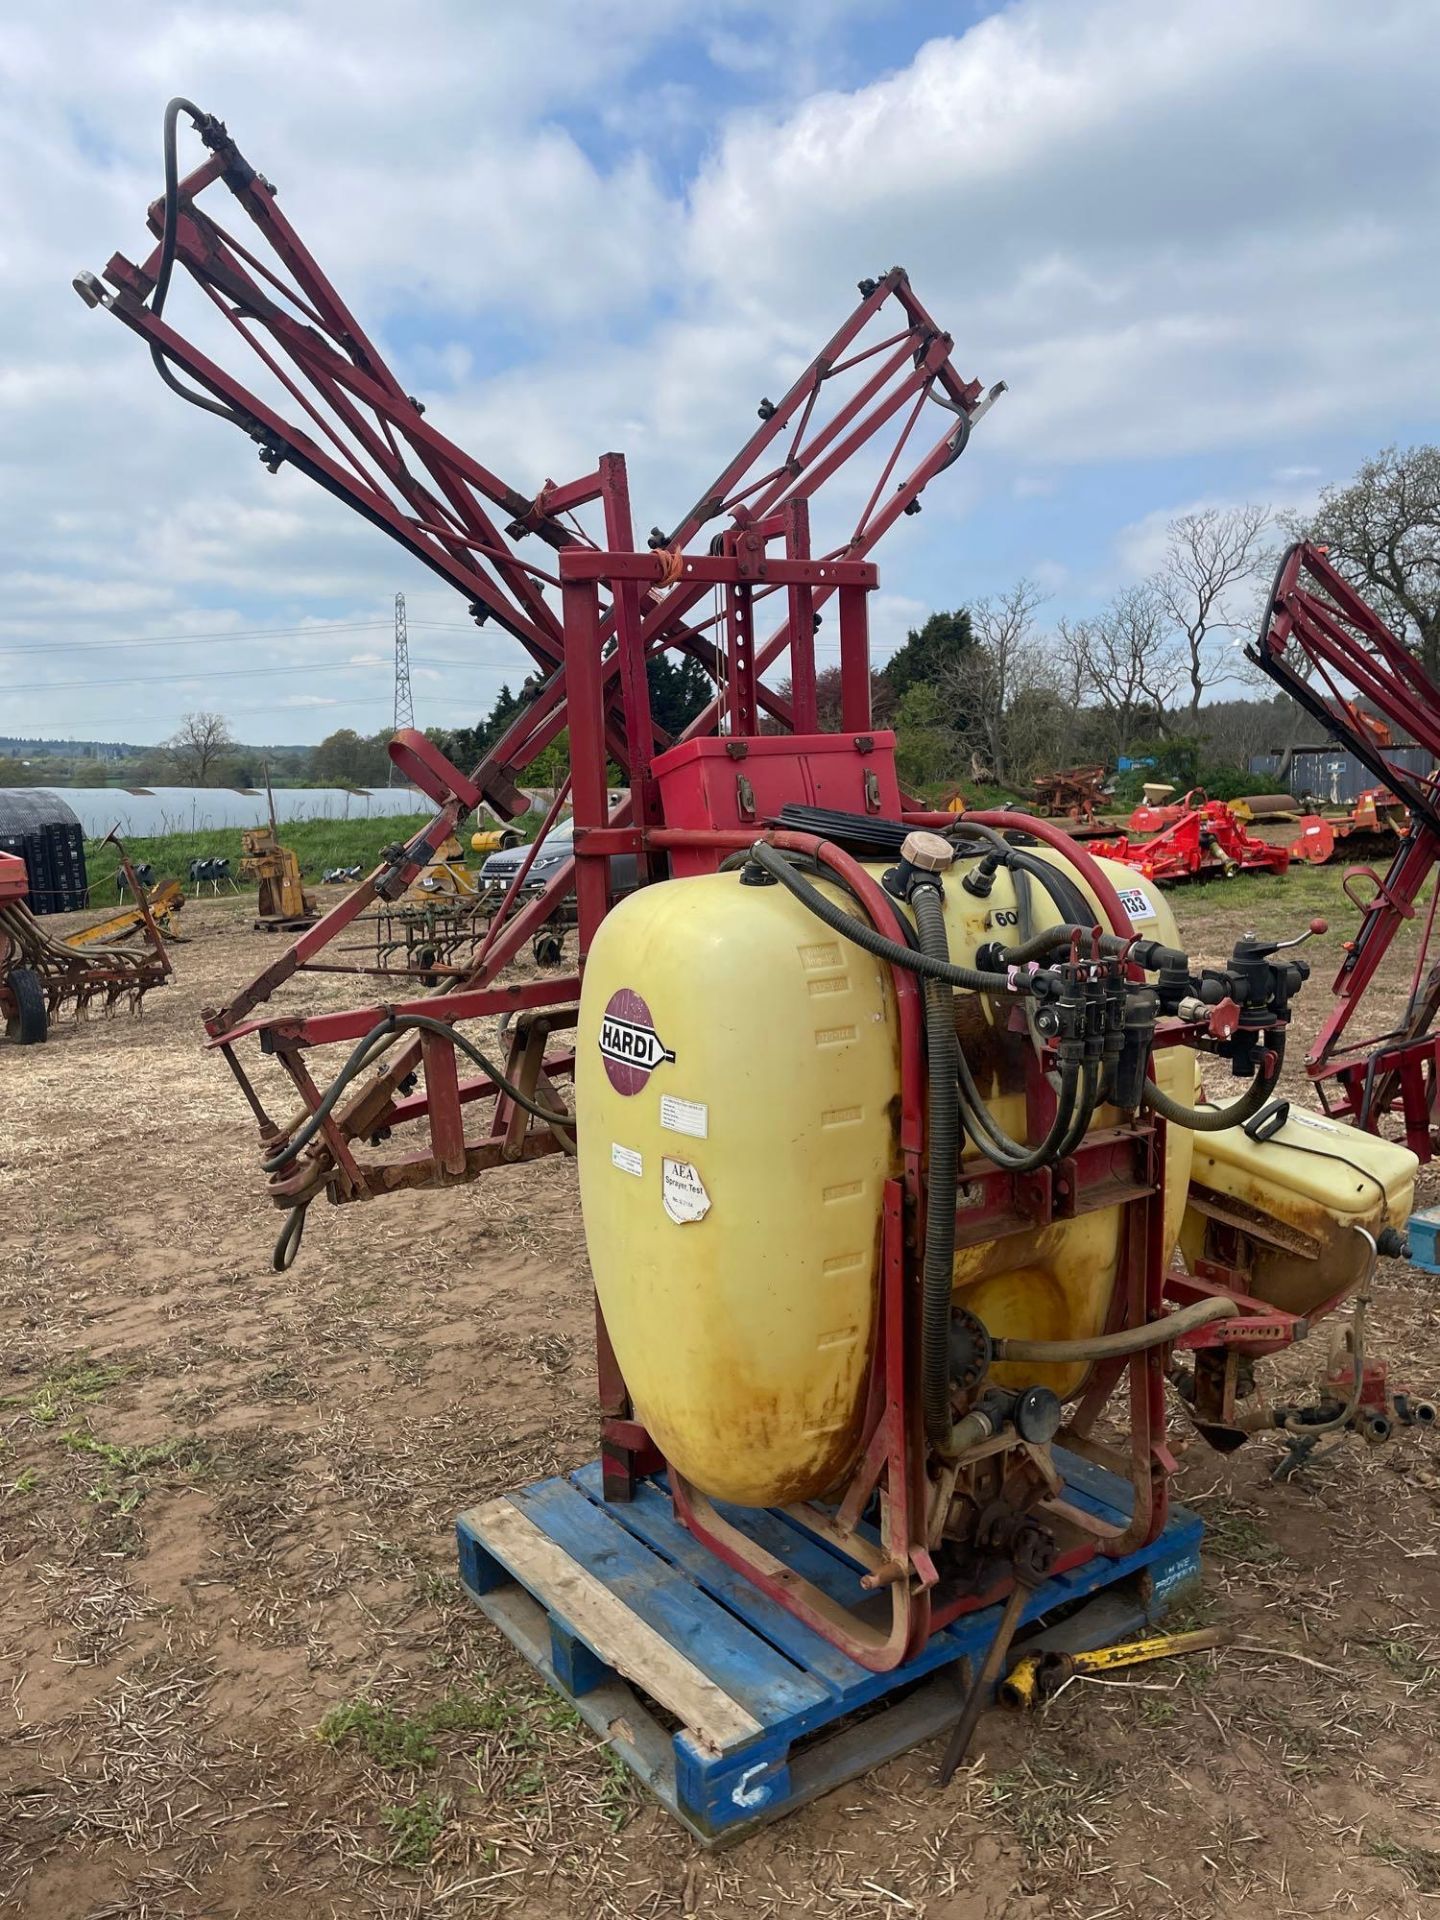 Hardi K600 12m linkage mounted sprayer with 600l tank, induction hopper and clean water tank with ma